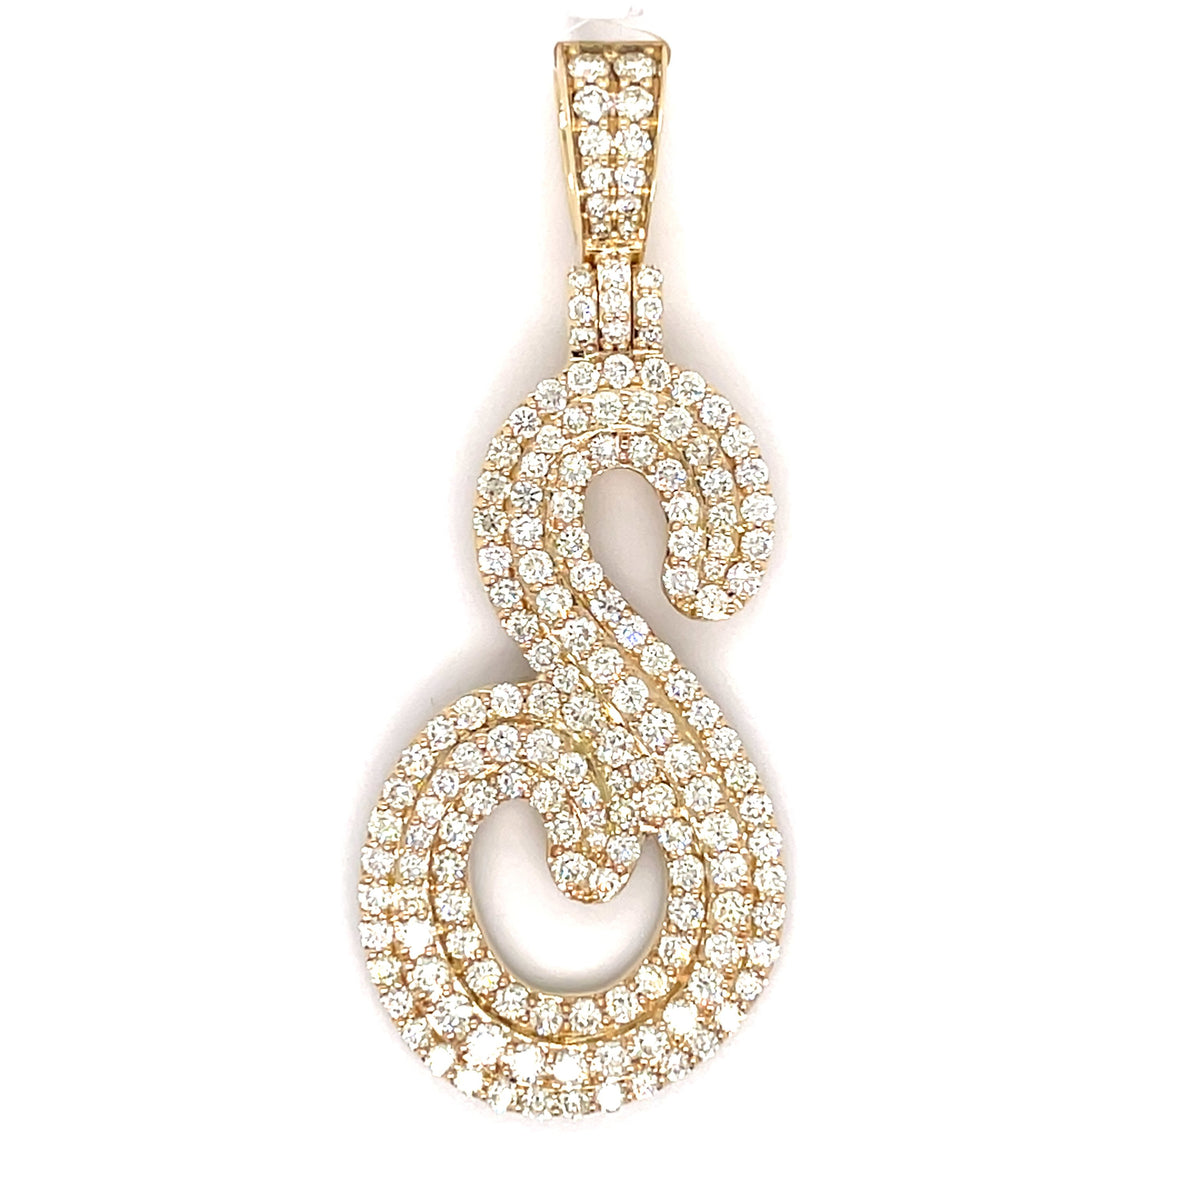 4.00 CT. Diamond Baguette Initial "S" Pendant in 10KT Gold - White Carat - USA & Canada